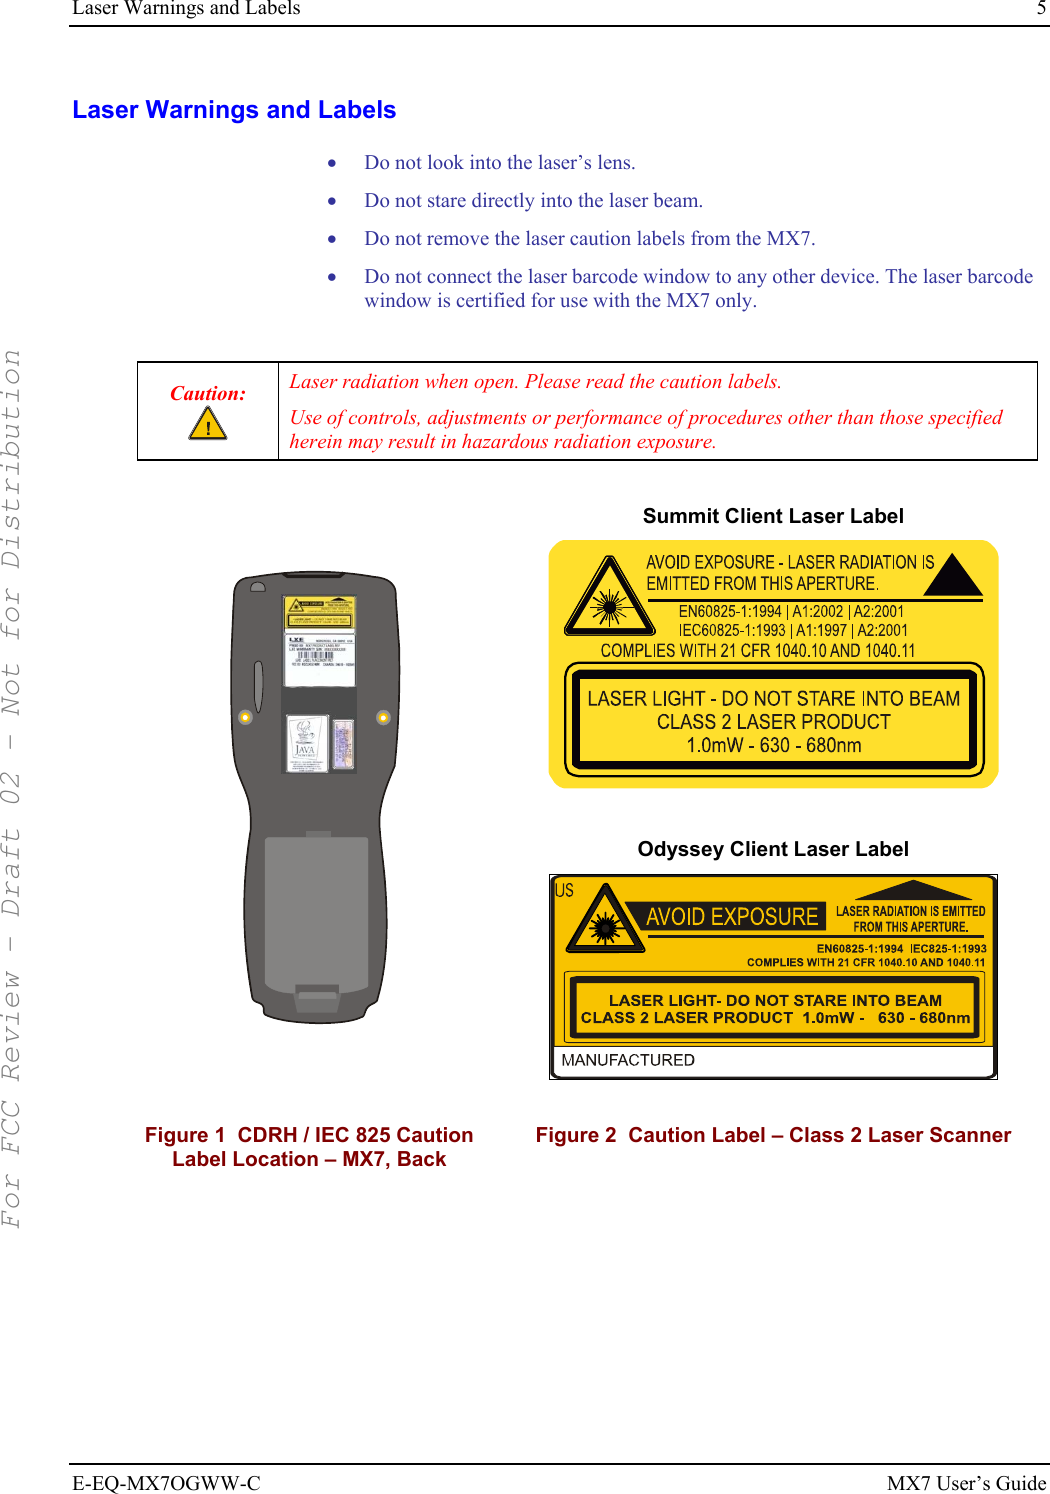 Laser Warnings and Labels  5 E-EQ-MX7OGWW-C MX7 User’s Guide Laser Warnings and Labels • Do not look into the laser’s lens. • Do not stare directly into the laser beam.  • Do not remove the laser caution labels from the MX7.  • Do not connect the laser barcode window to any other device. The laser barcode window is certified for use with the MX7 only.  Caution:  Laser radiation when open. Please read the caution labels. Use of controls, adjustments or performance of procedures other than those specified herein may result in hazardous radiation exposure.        Summit Client Laser Label   Odyssey Client Laser Label   Figure 1  CDRH / IEC 825 Caution Label Location – MX7, Back Figure 2  Caution Label – Class 2 Laser Scanner  For FCC Review - Draft 02 - Not for Distribution